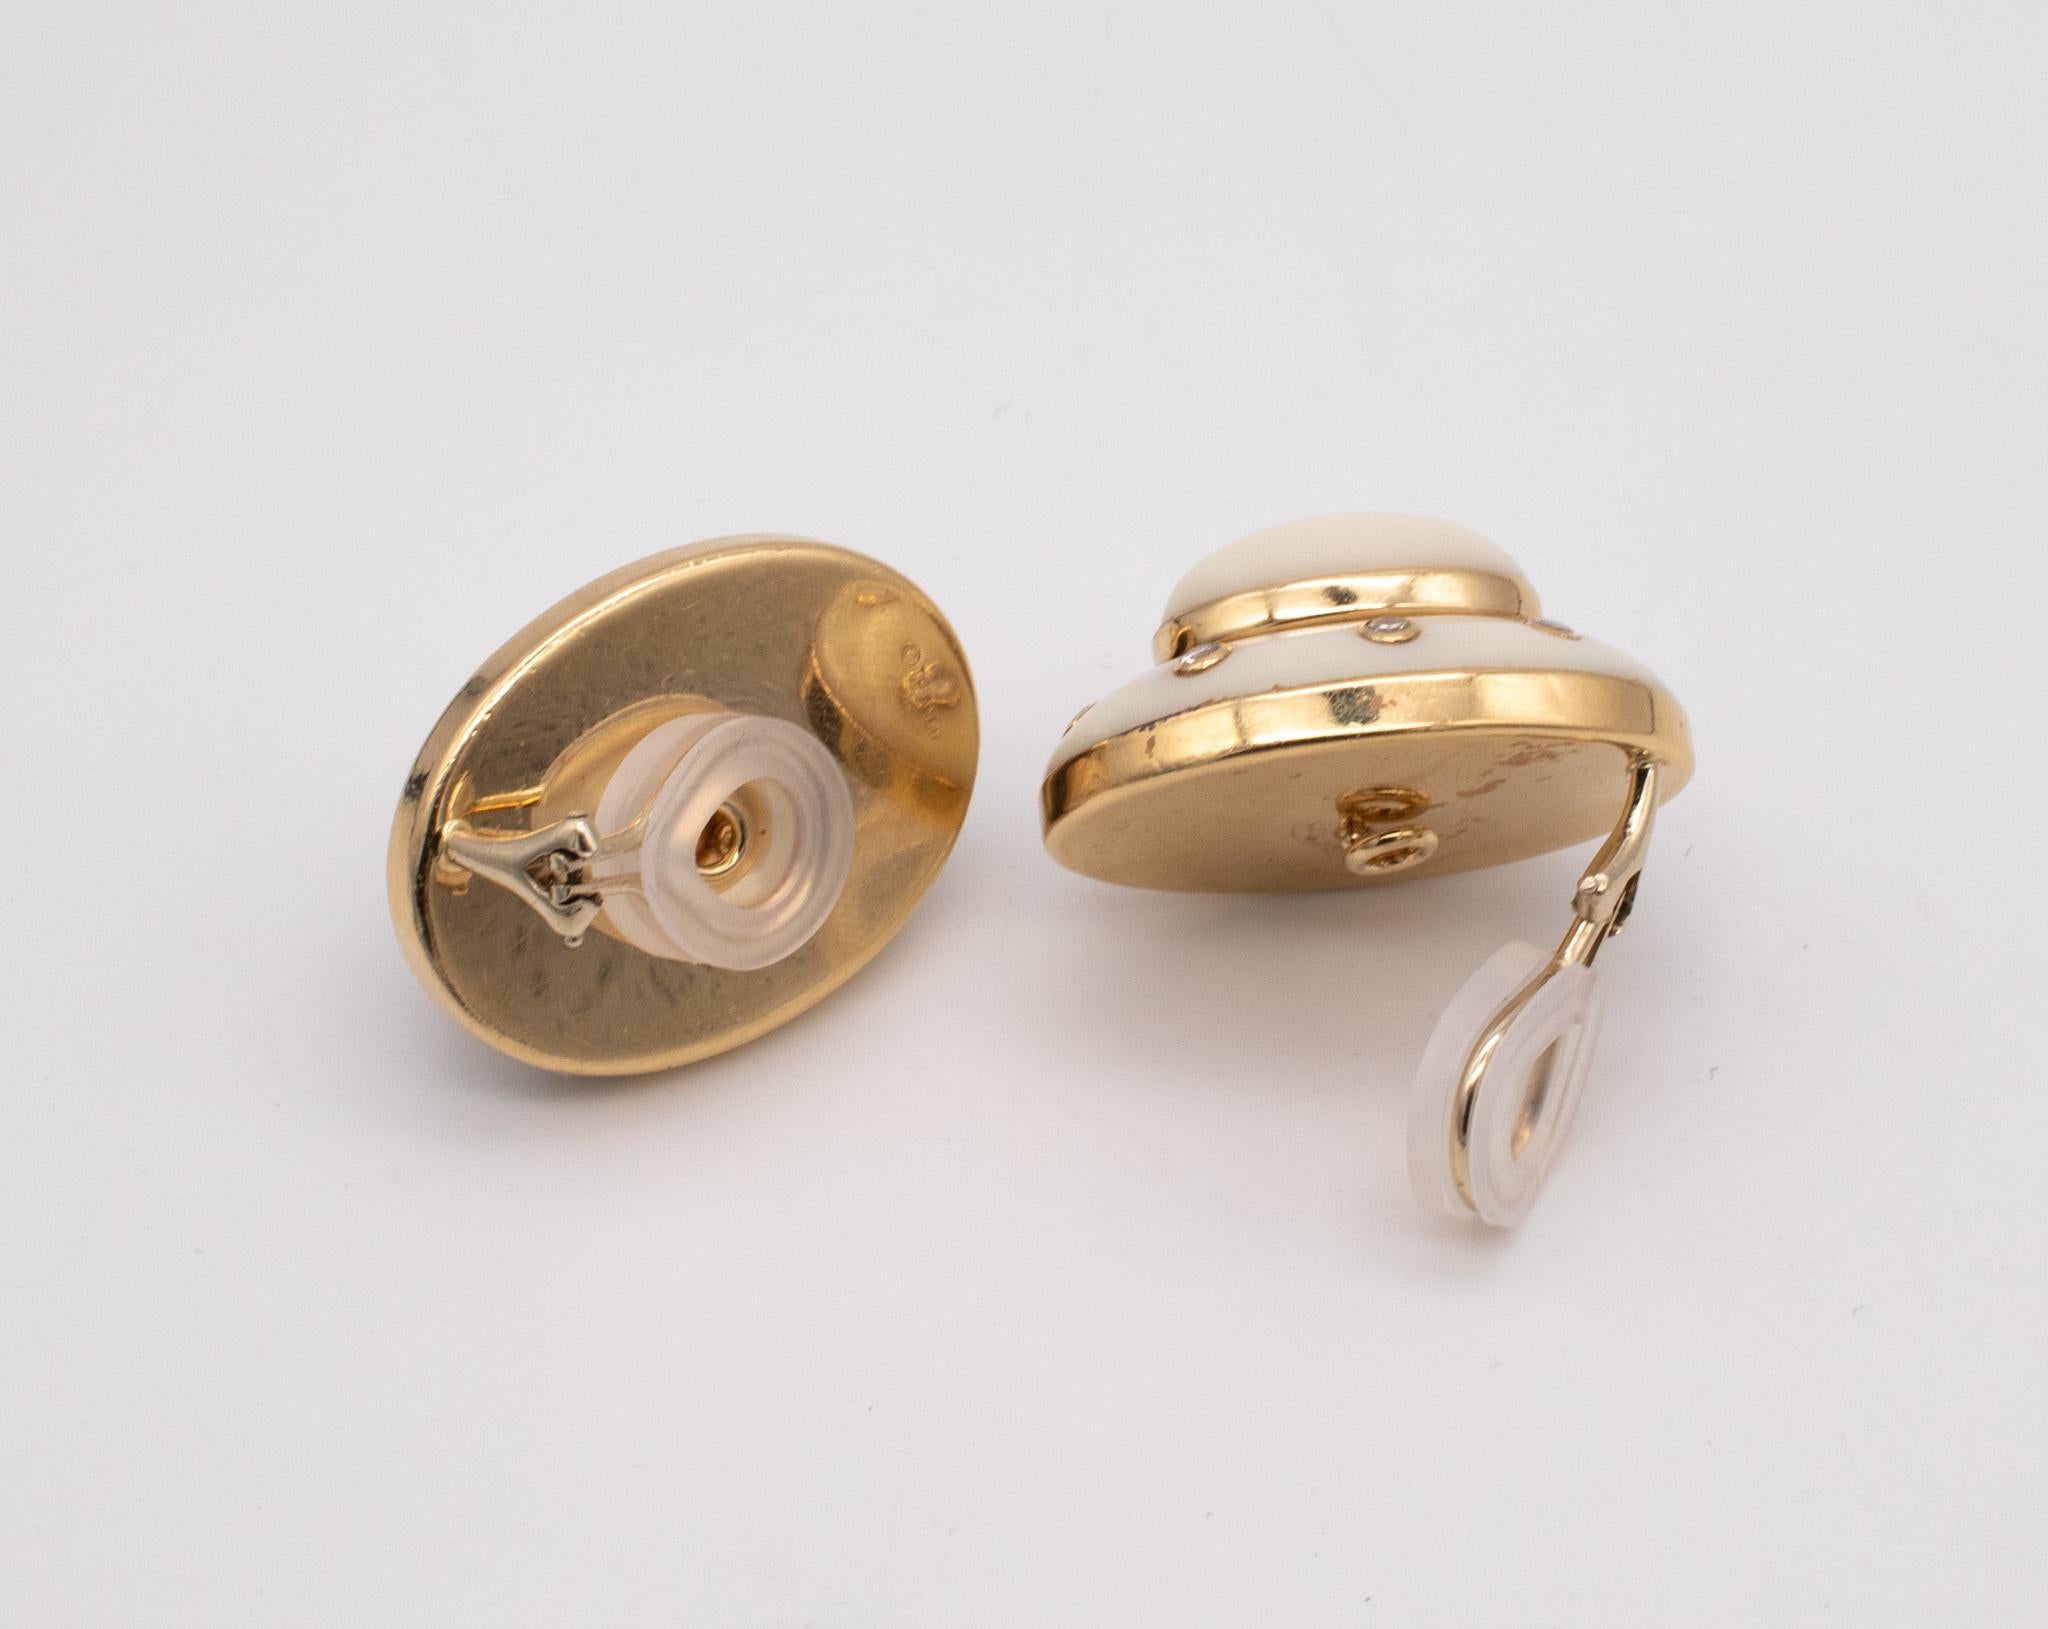 Modernist Seaman Schepps 1970 Trianon 18Kt Yellow Gold Ear Clips with Diamonds and Coral